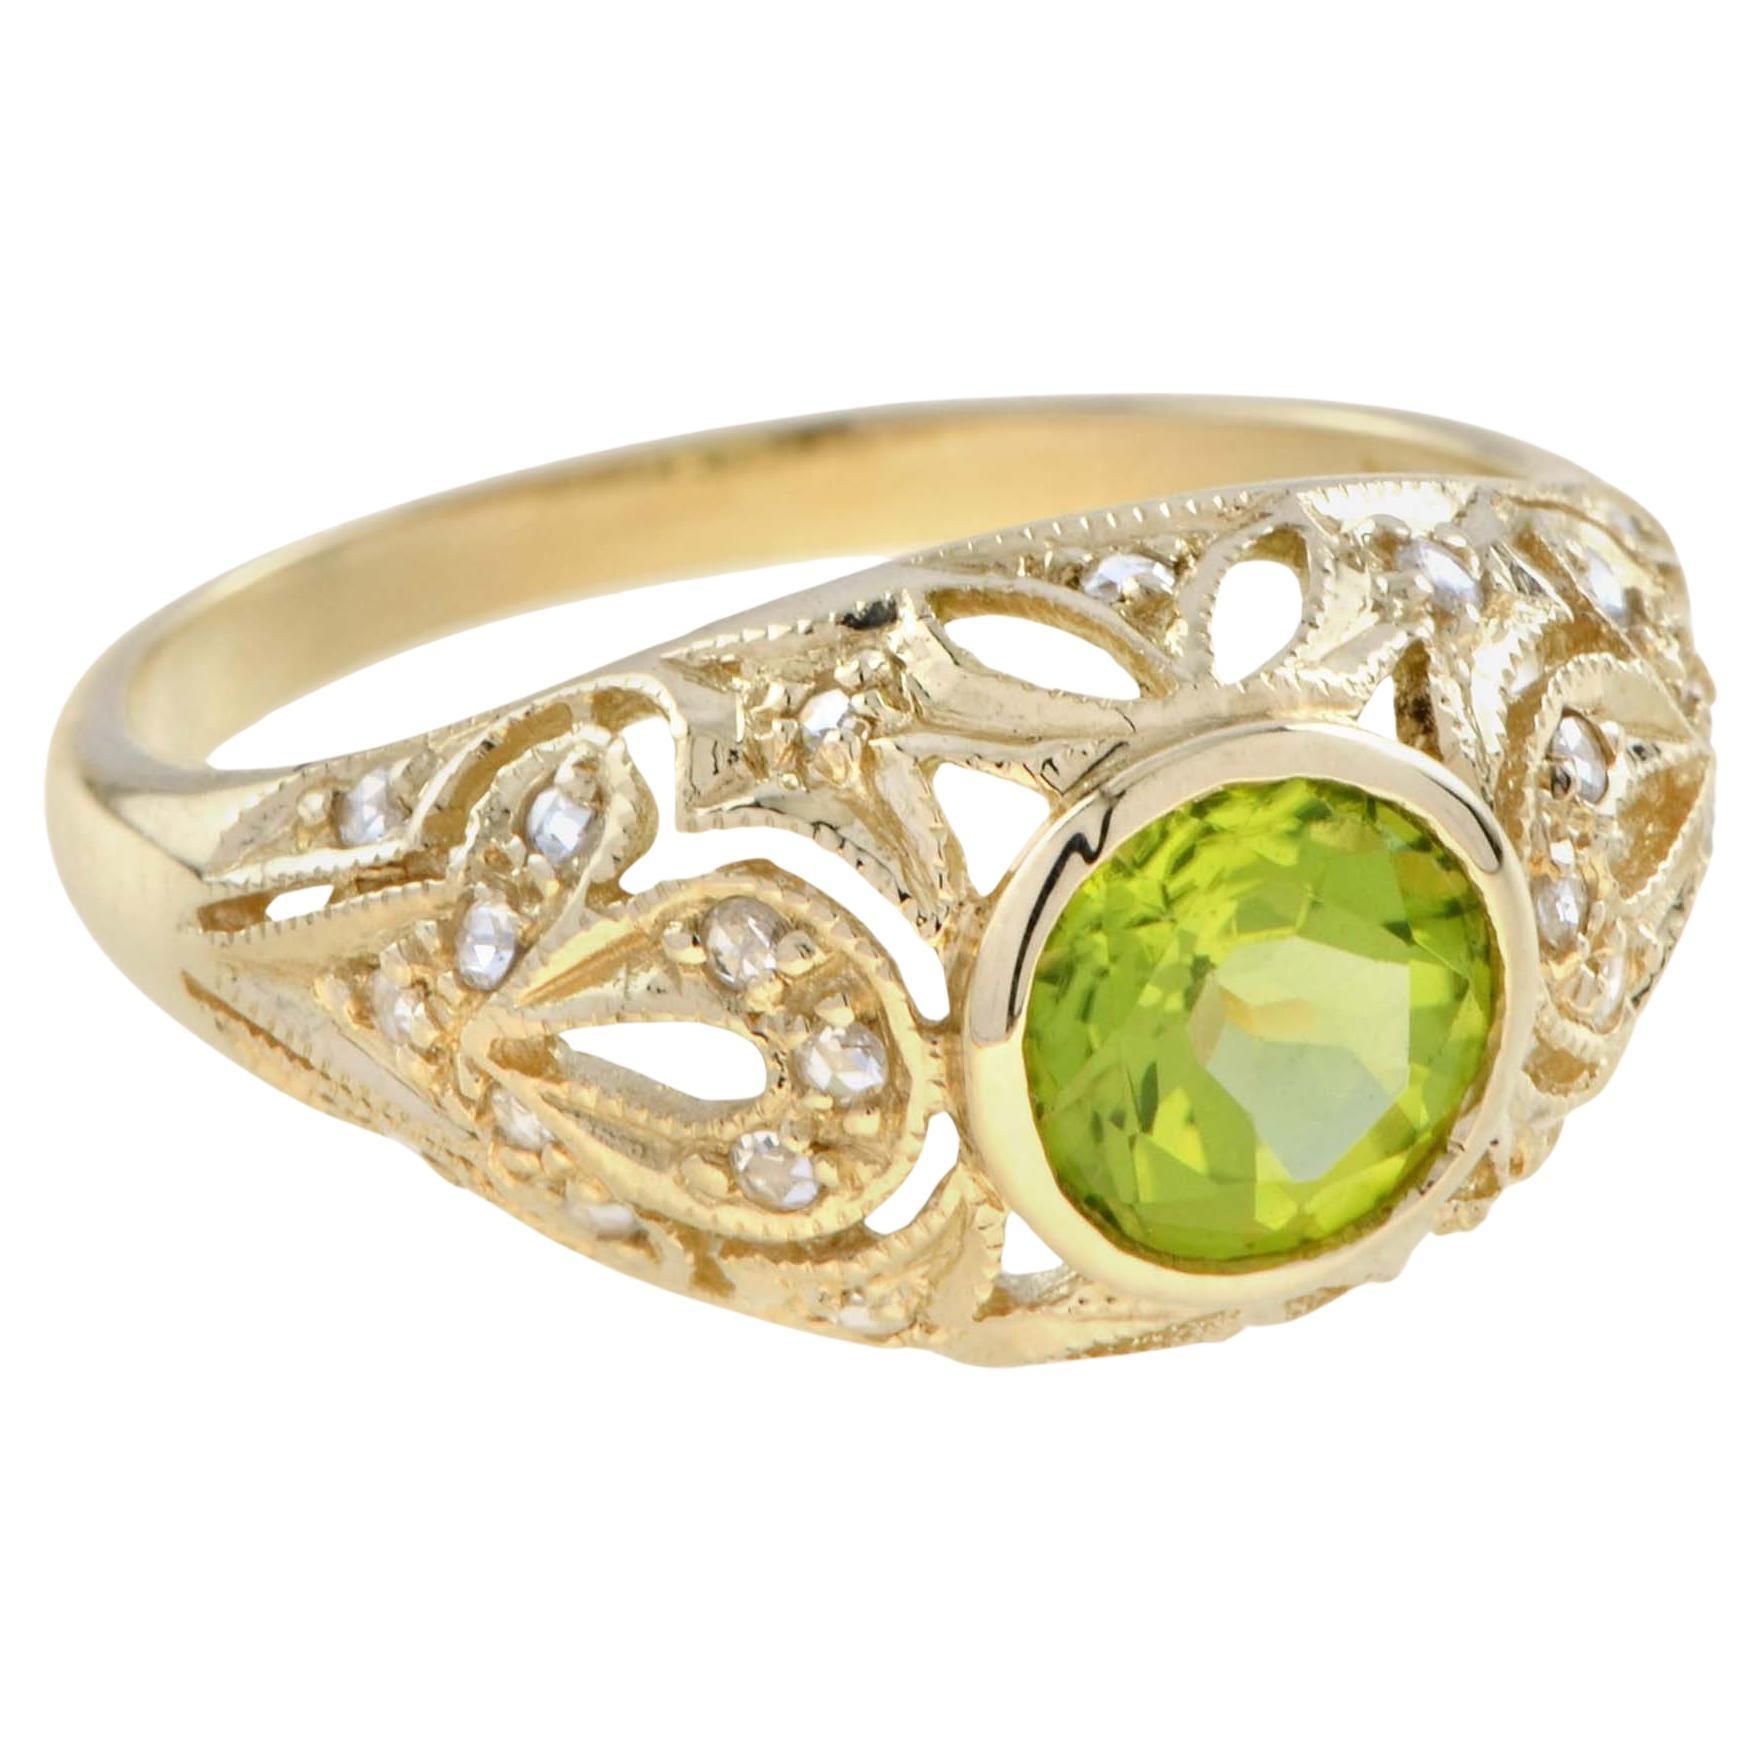 Natural Peridot and Diamond Vintage Style Floral Filigree Ring in Solid 9K Gold